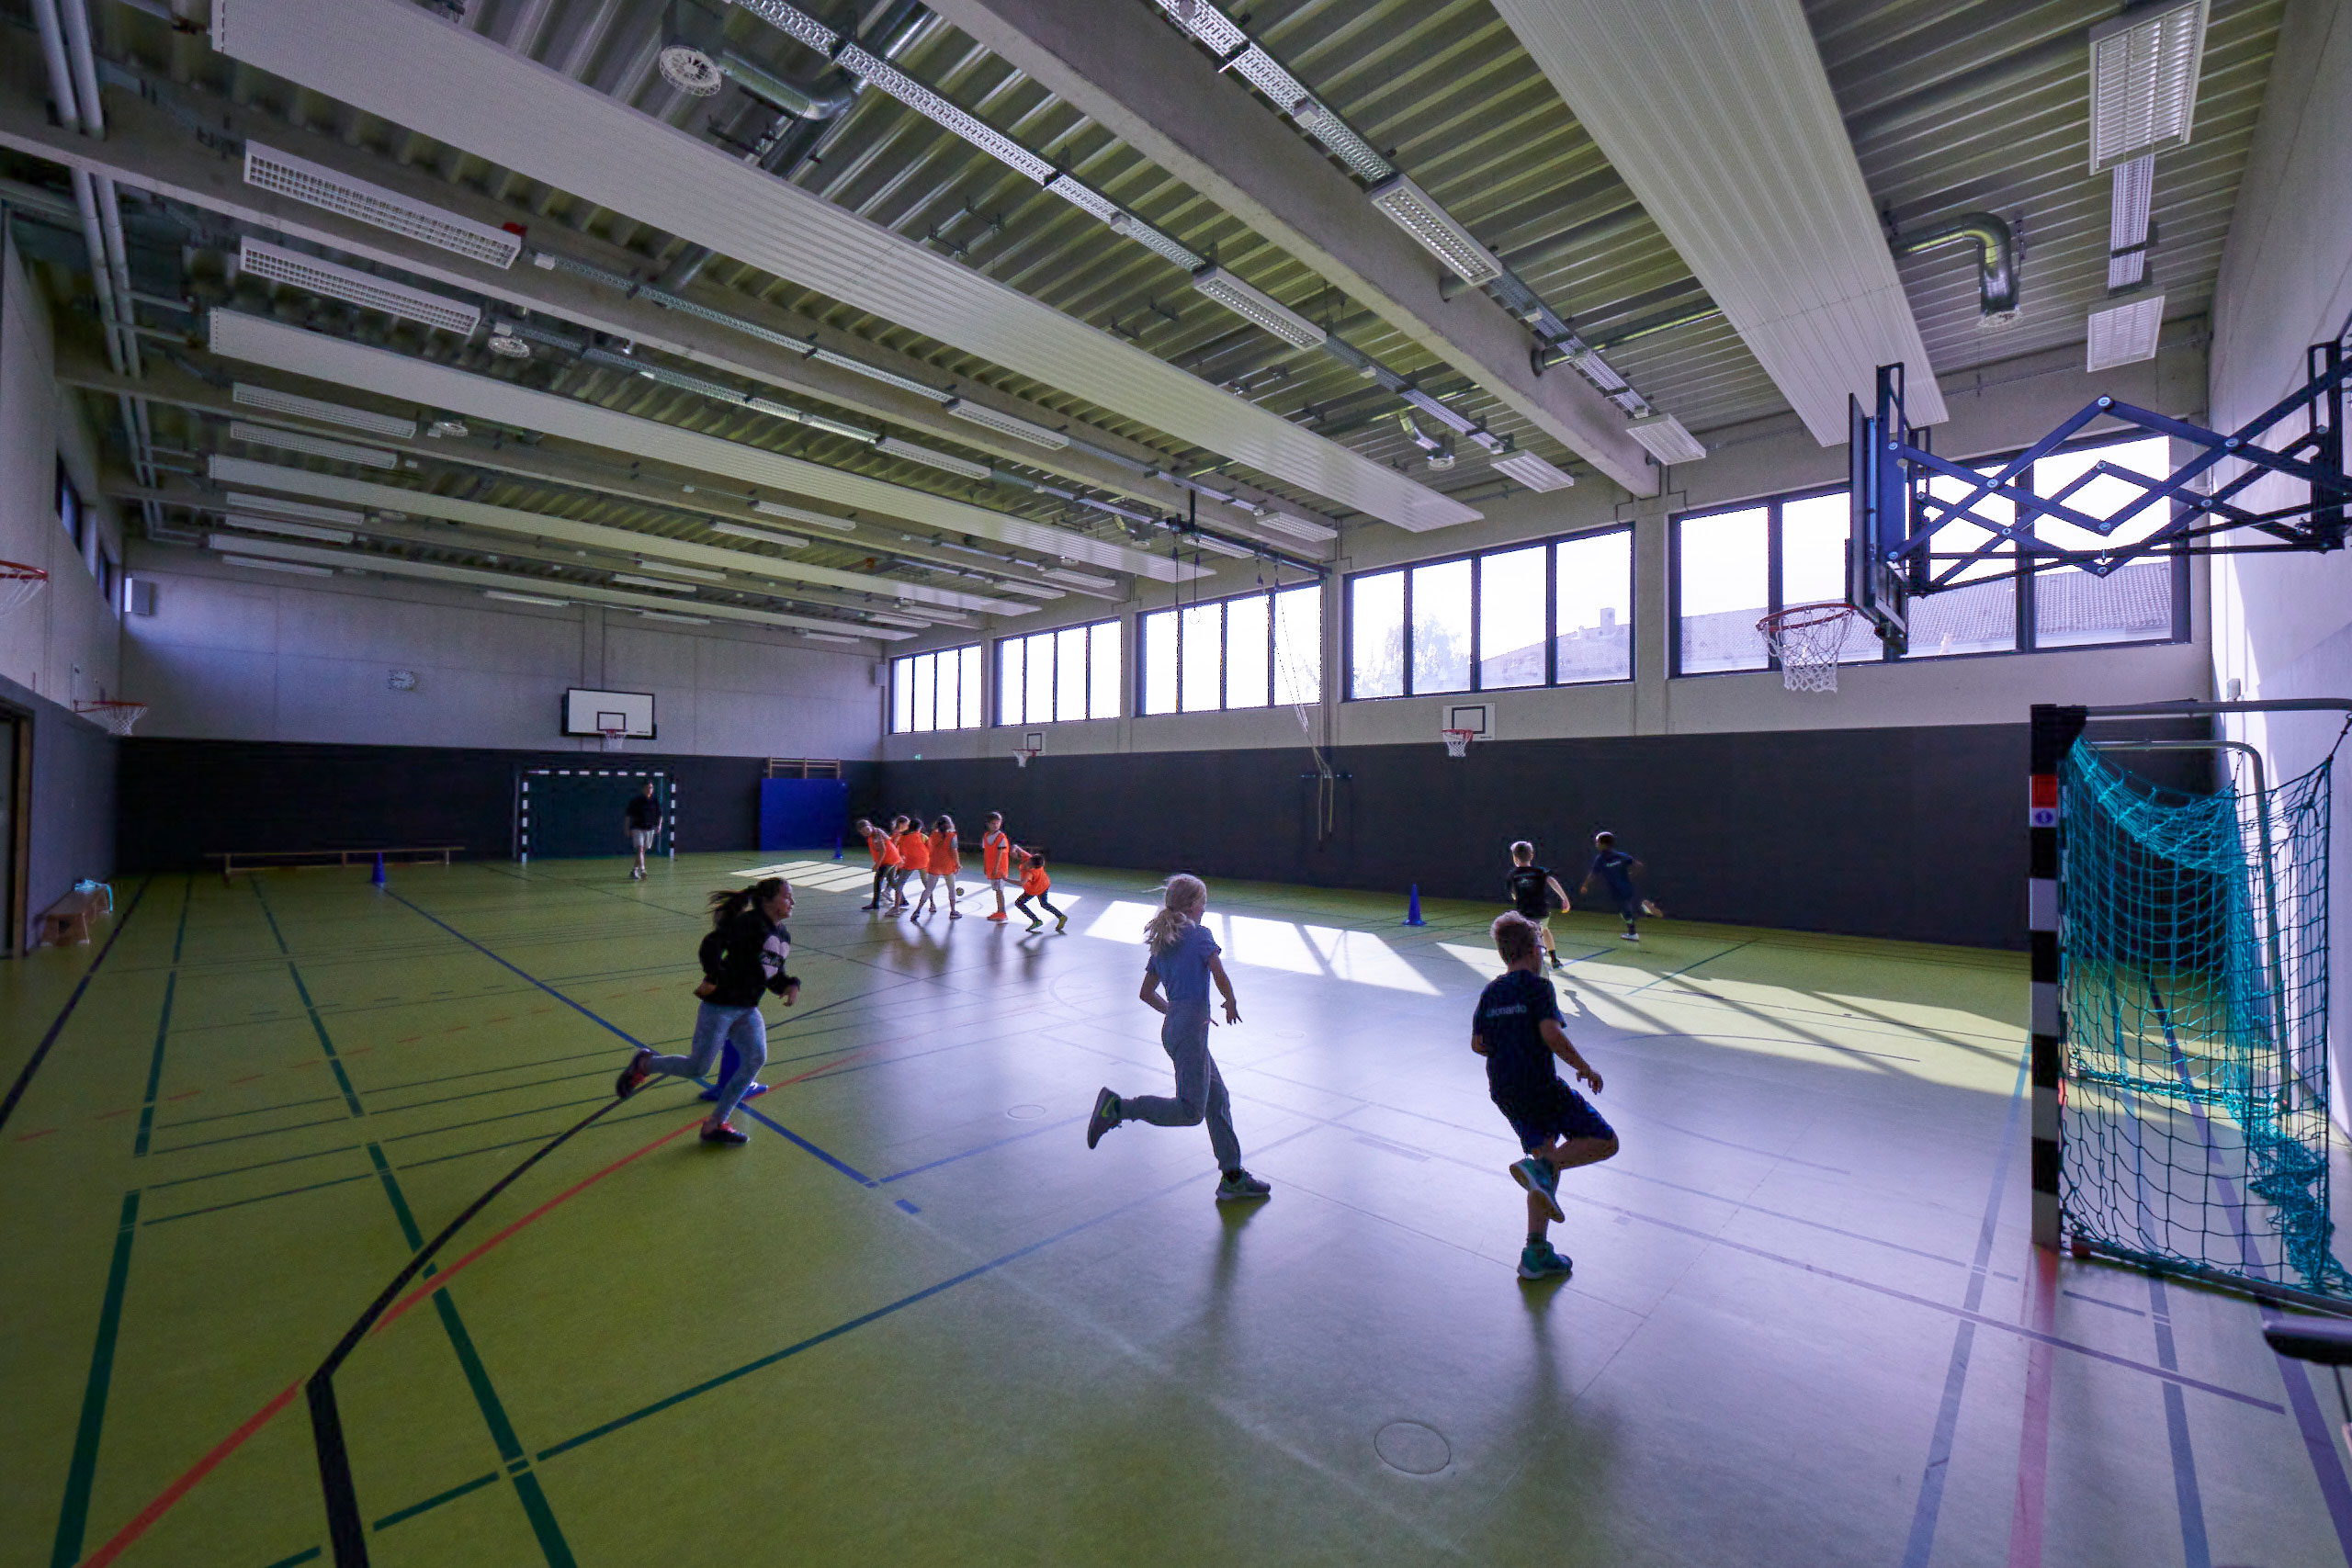 Students in sports lessons in the gym. Some run through the hall.